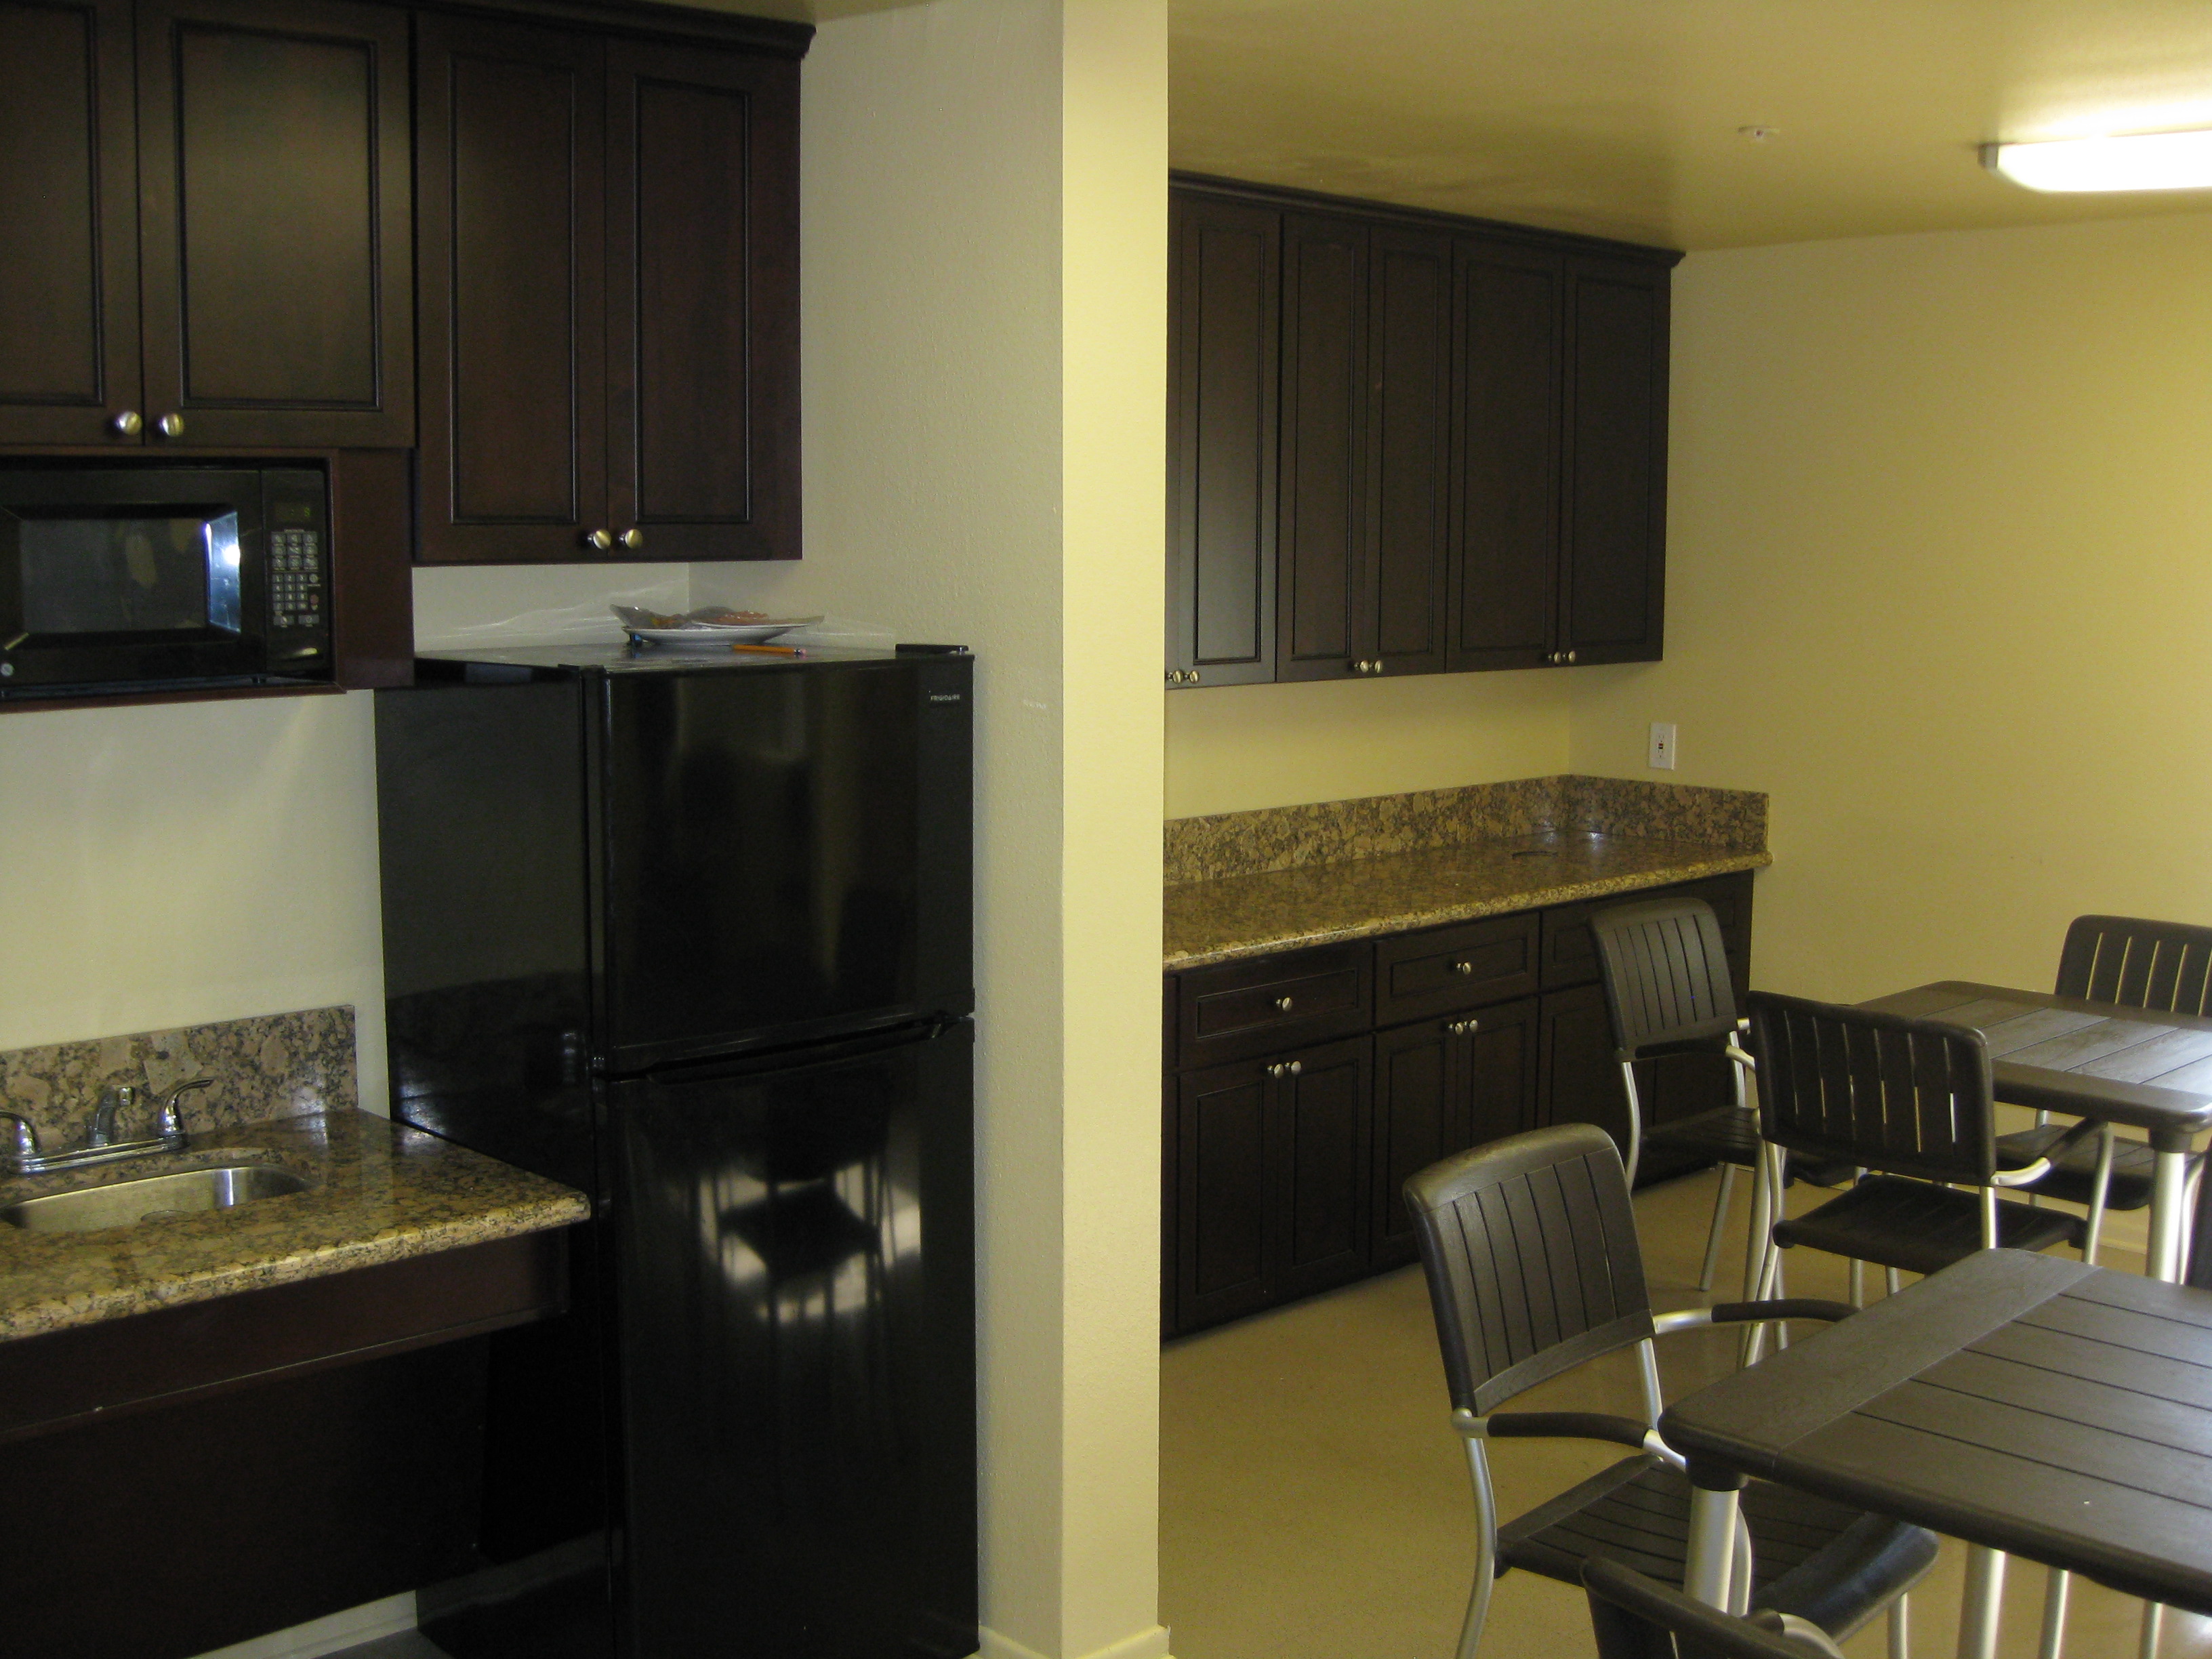 Paradise arms common area. community kitchen with long counter tops, fridge, sink, microwave, tables, and chairs